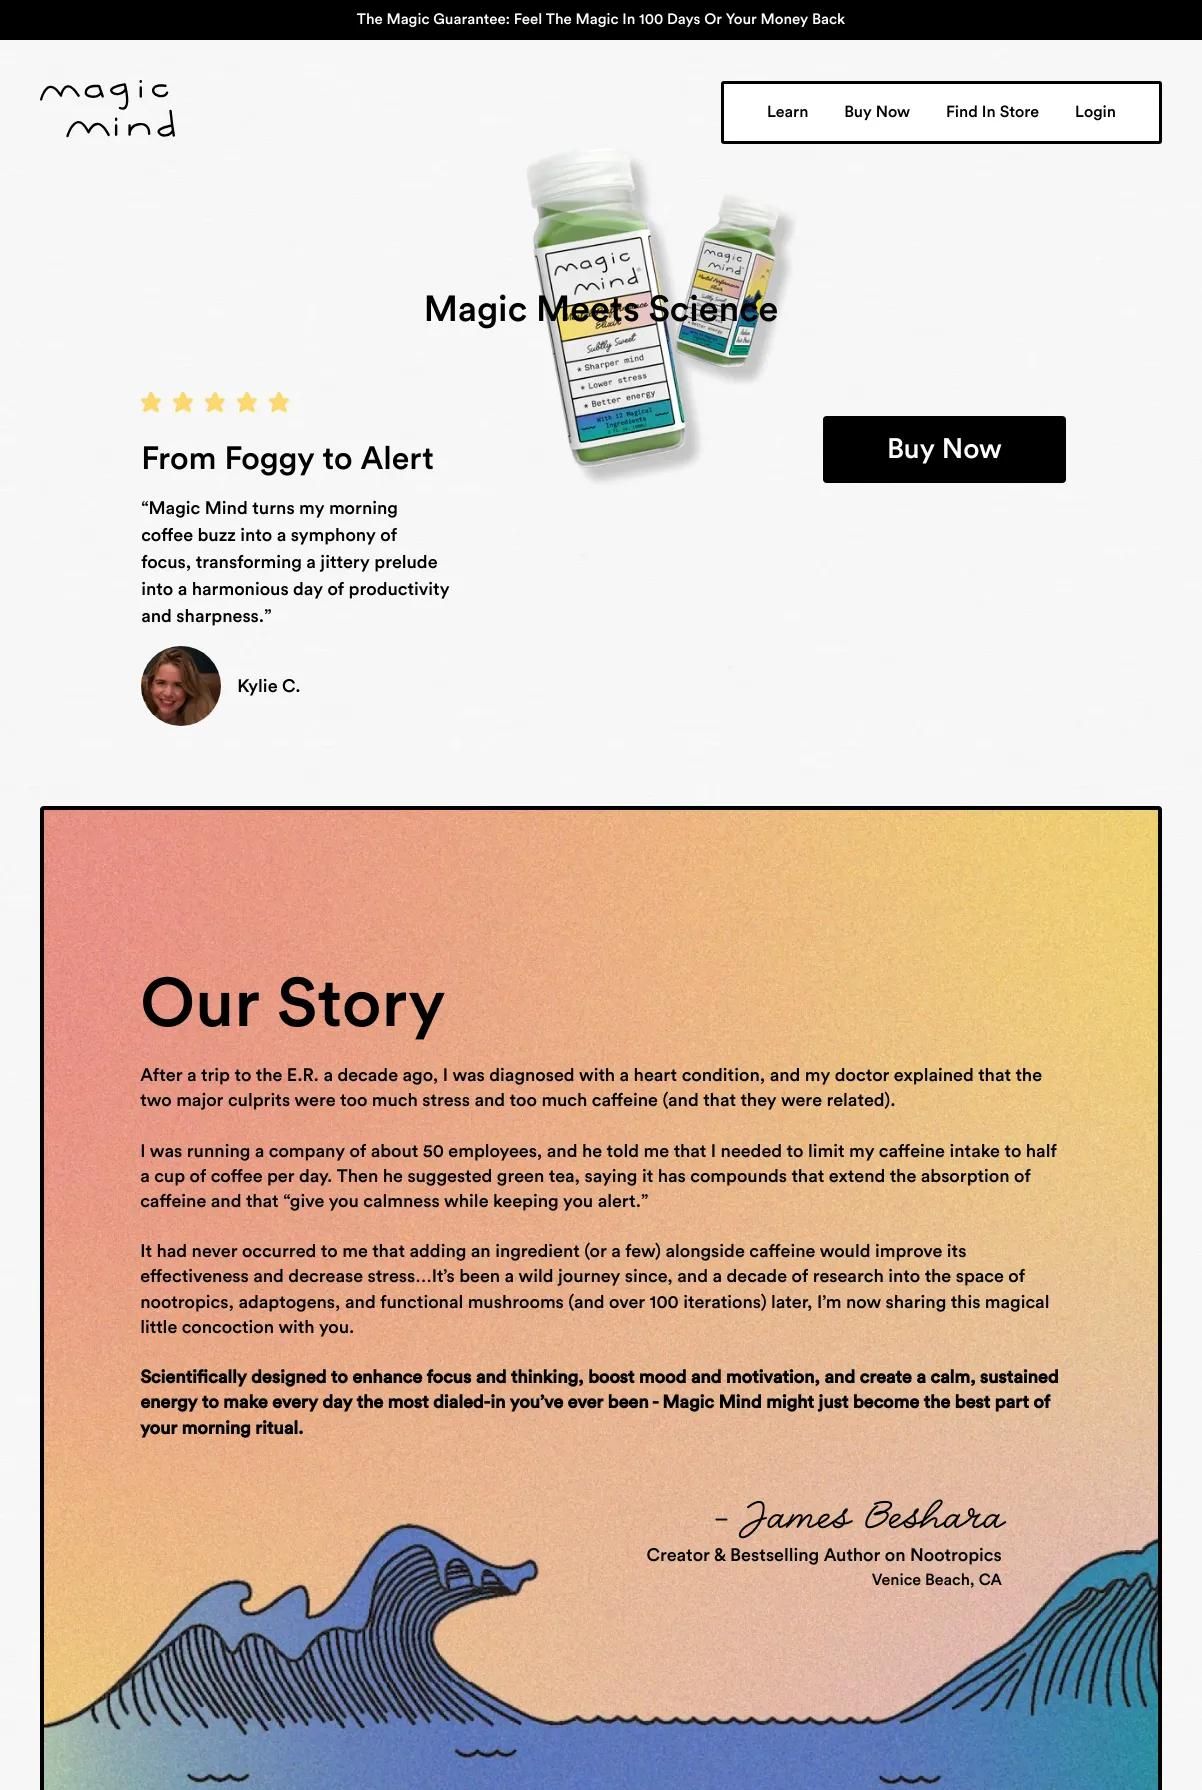 Screenshot 3 of Magic Mind (Example Shopify Food and Beverage Website)